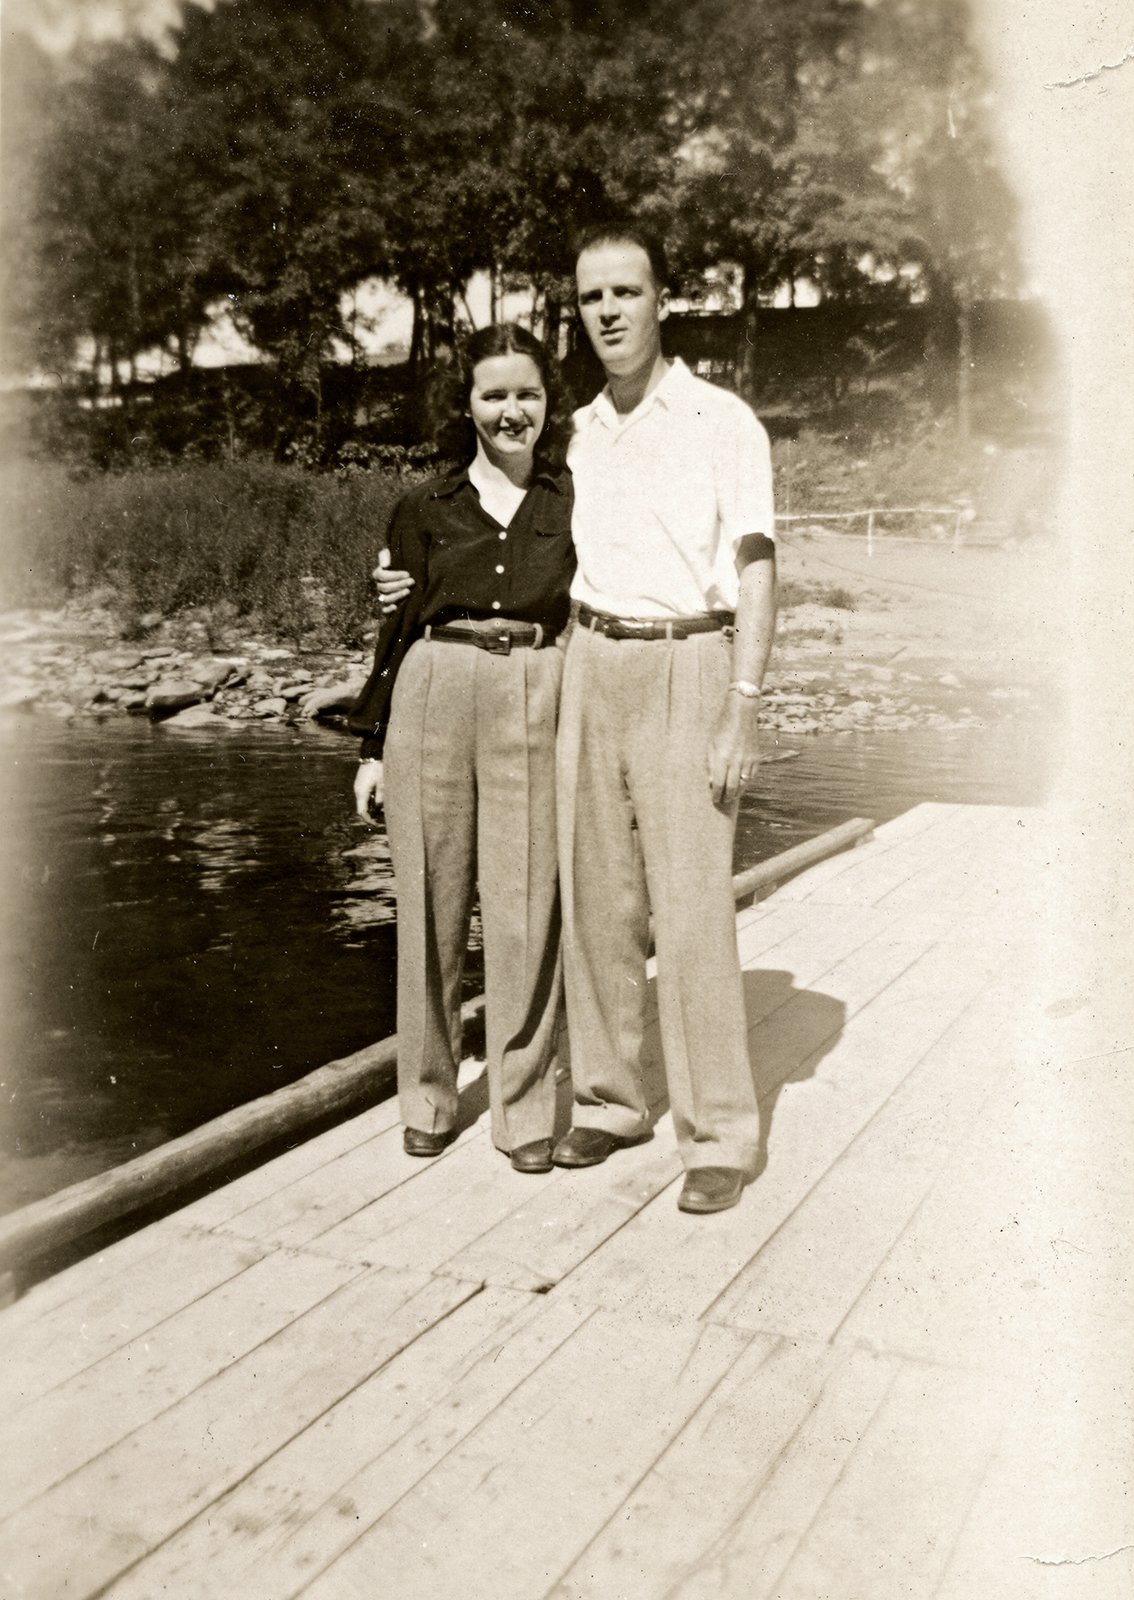 Alice’s parents Mildred Lynch and William McDermott on their honeymoon in Upstate New York, 1948.